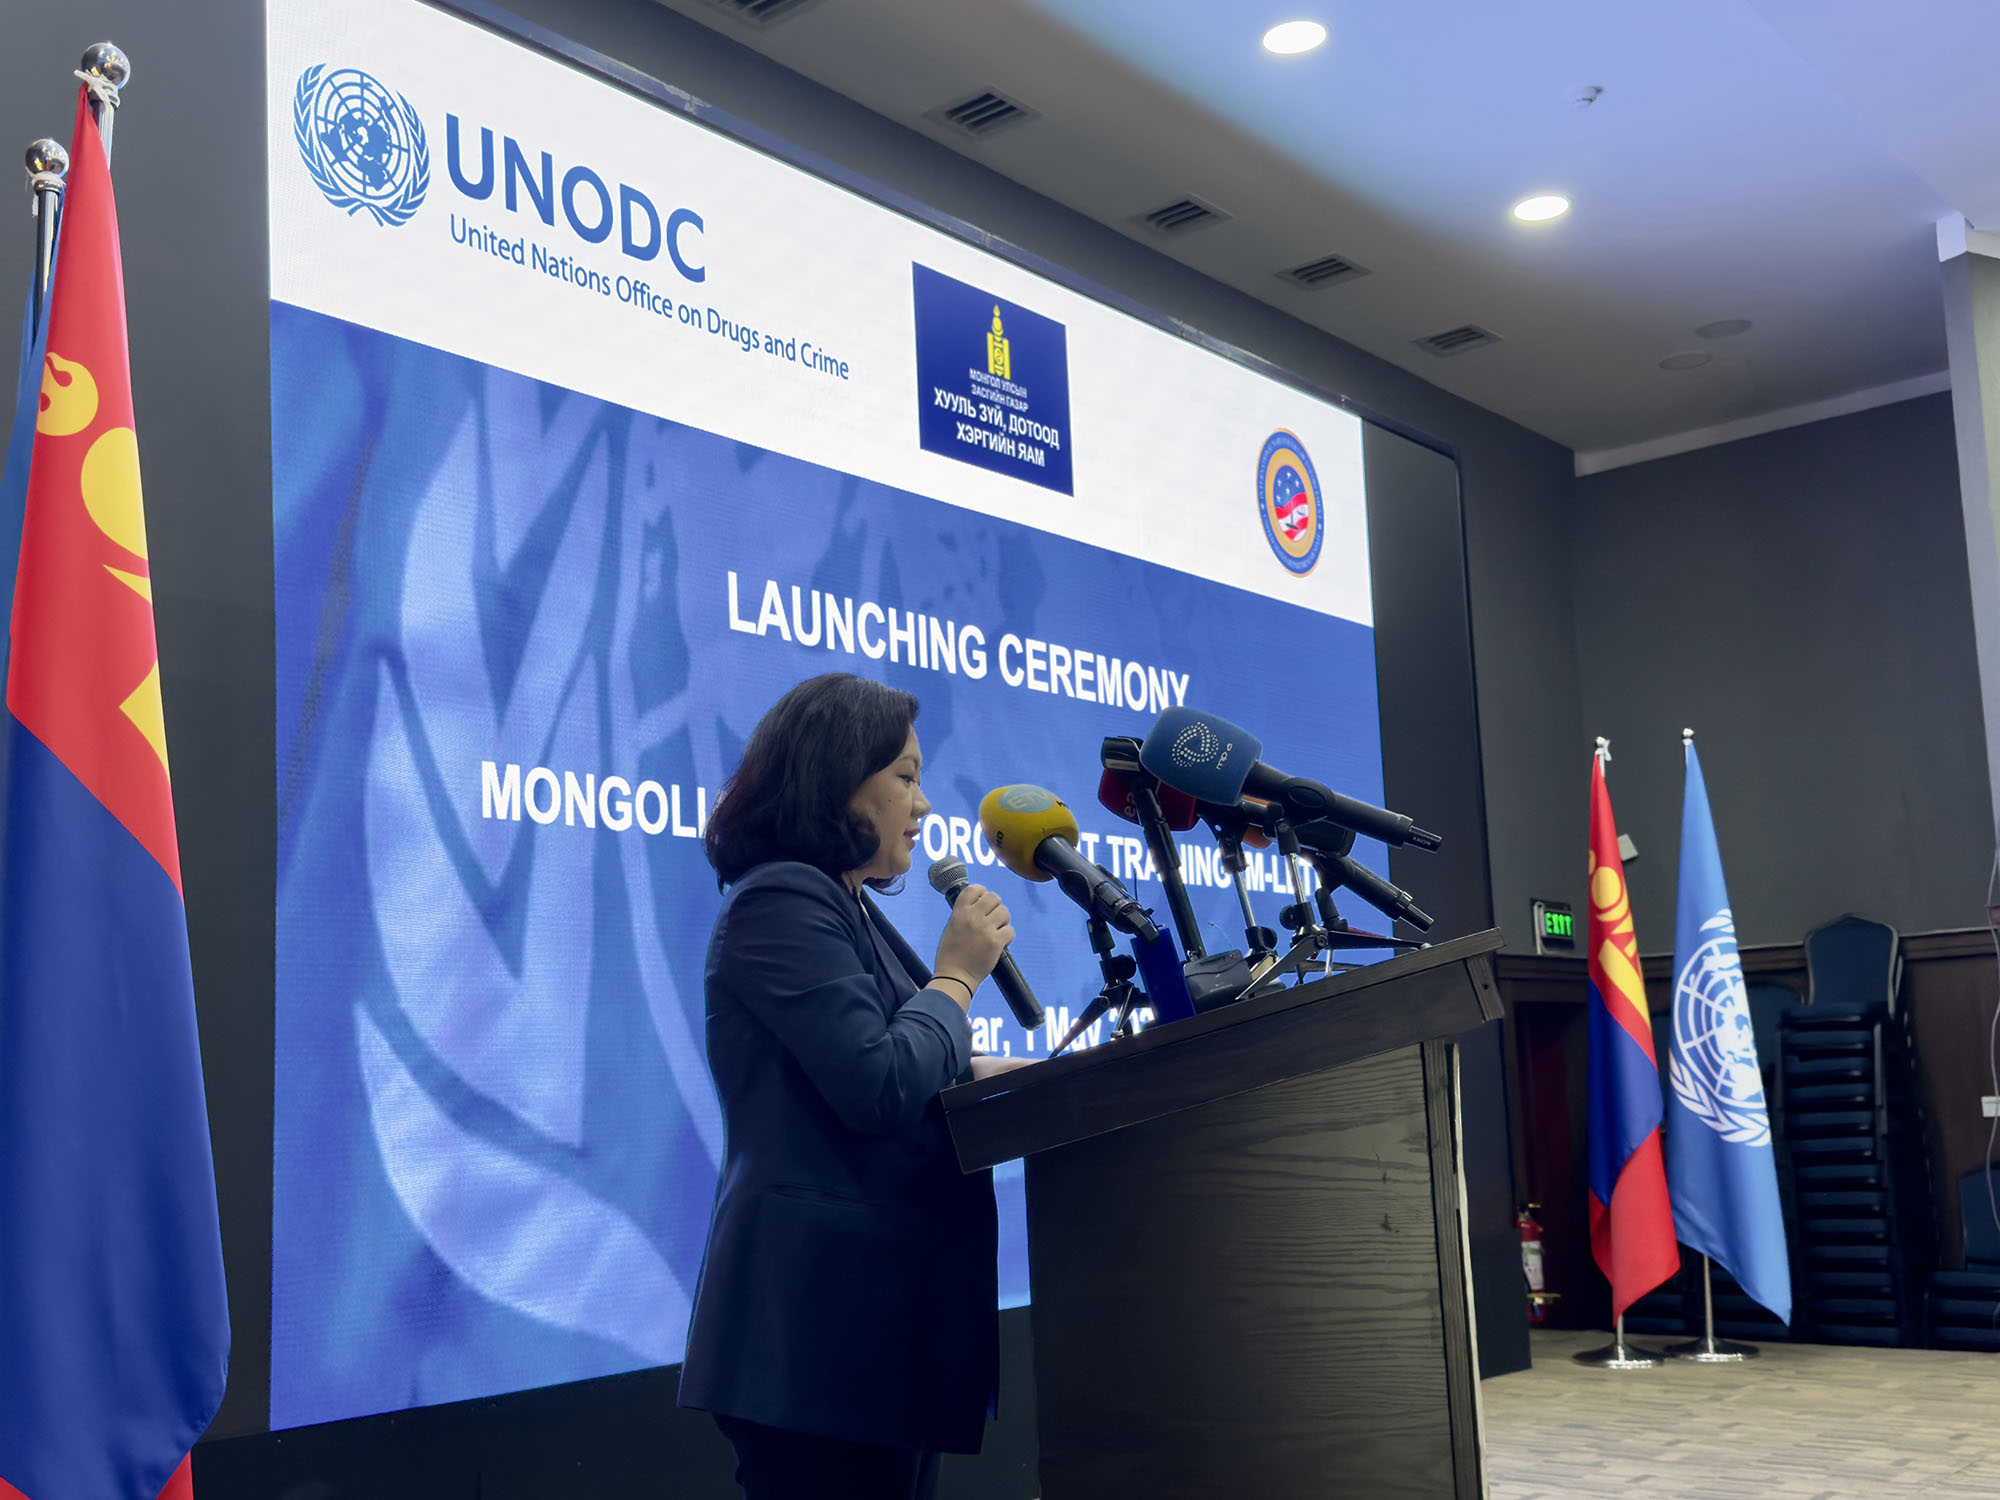 Solongoo Bayarsaikhan, Vice Minister of Justice and Home Affairs of Mongolia, welcomes the cooperation between her government and UNODC. Ulaanbaatar, Mongolia, 1 May. Photo: UNODC ROSEAP